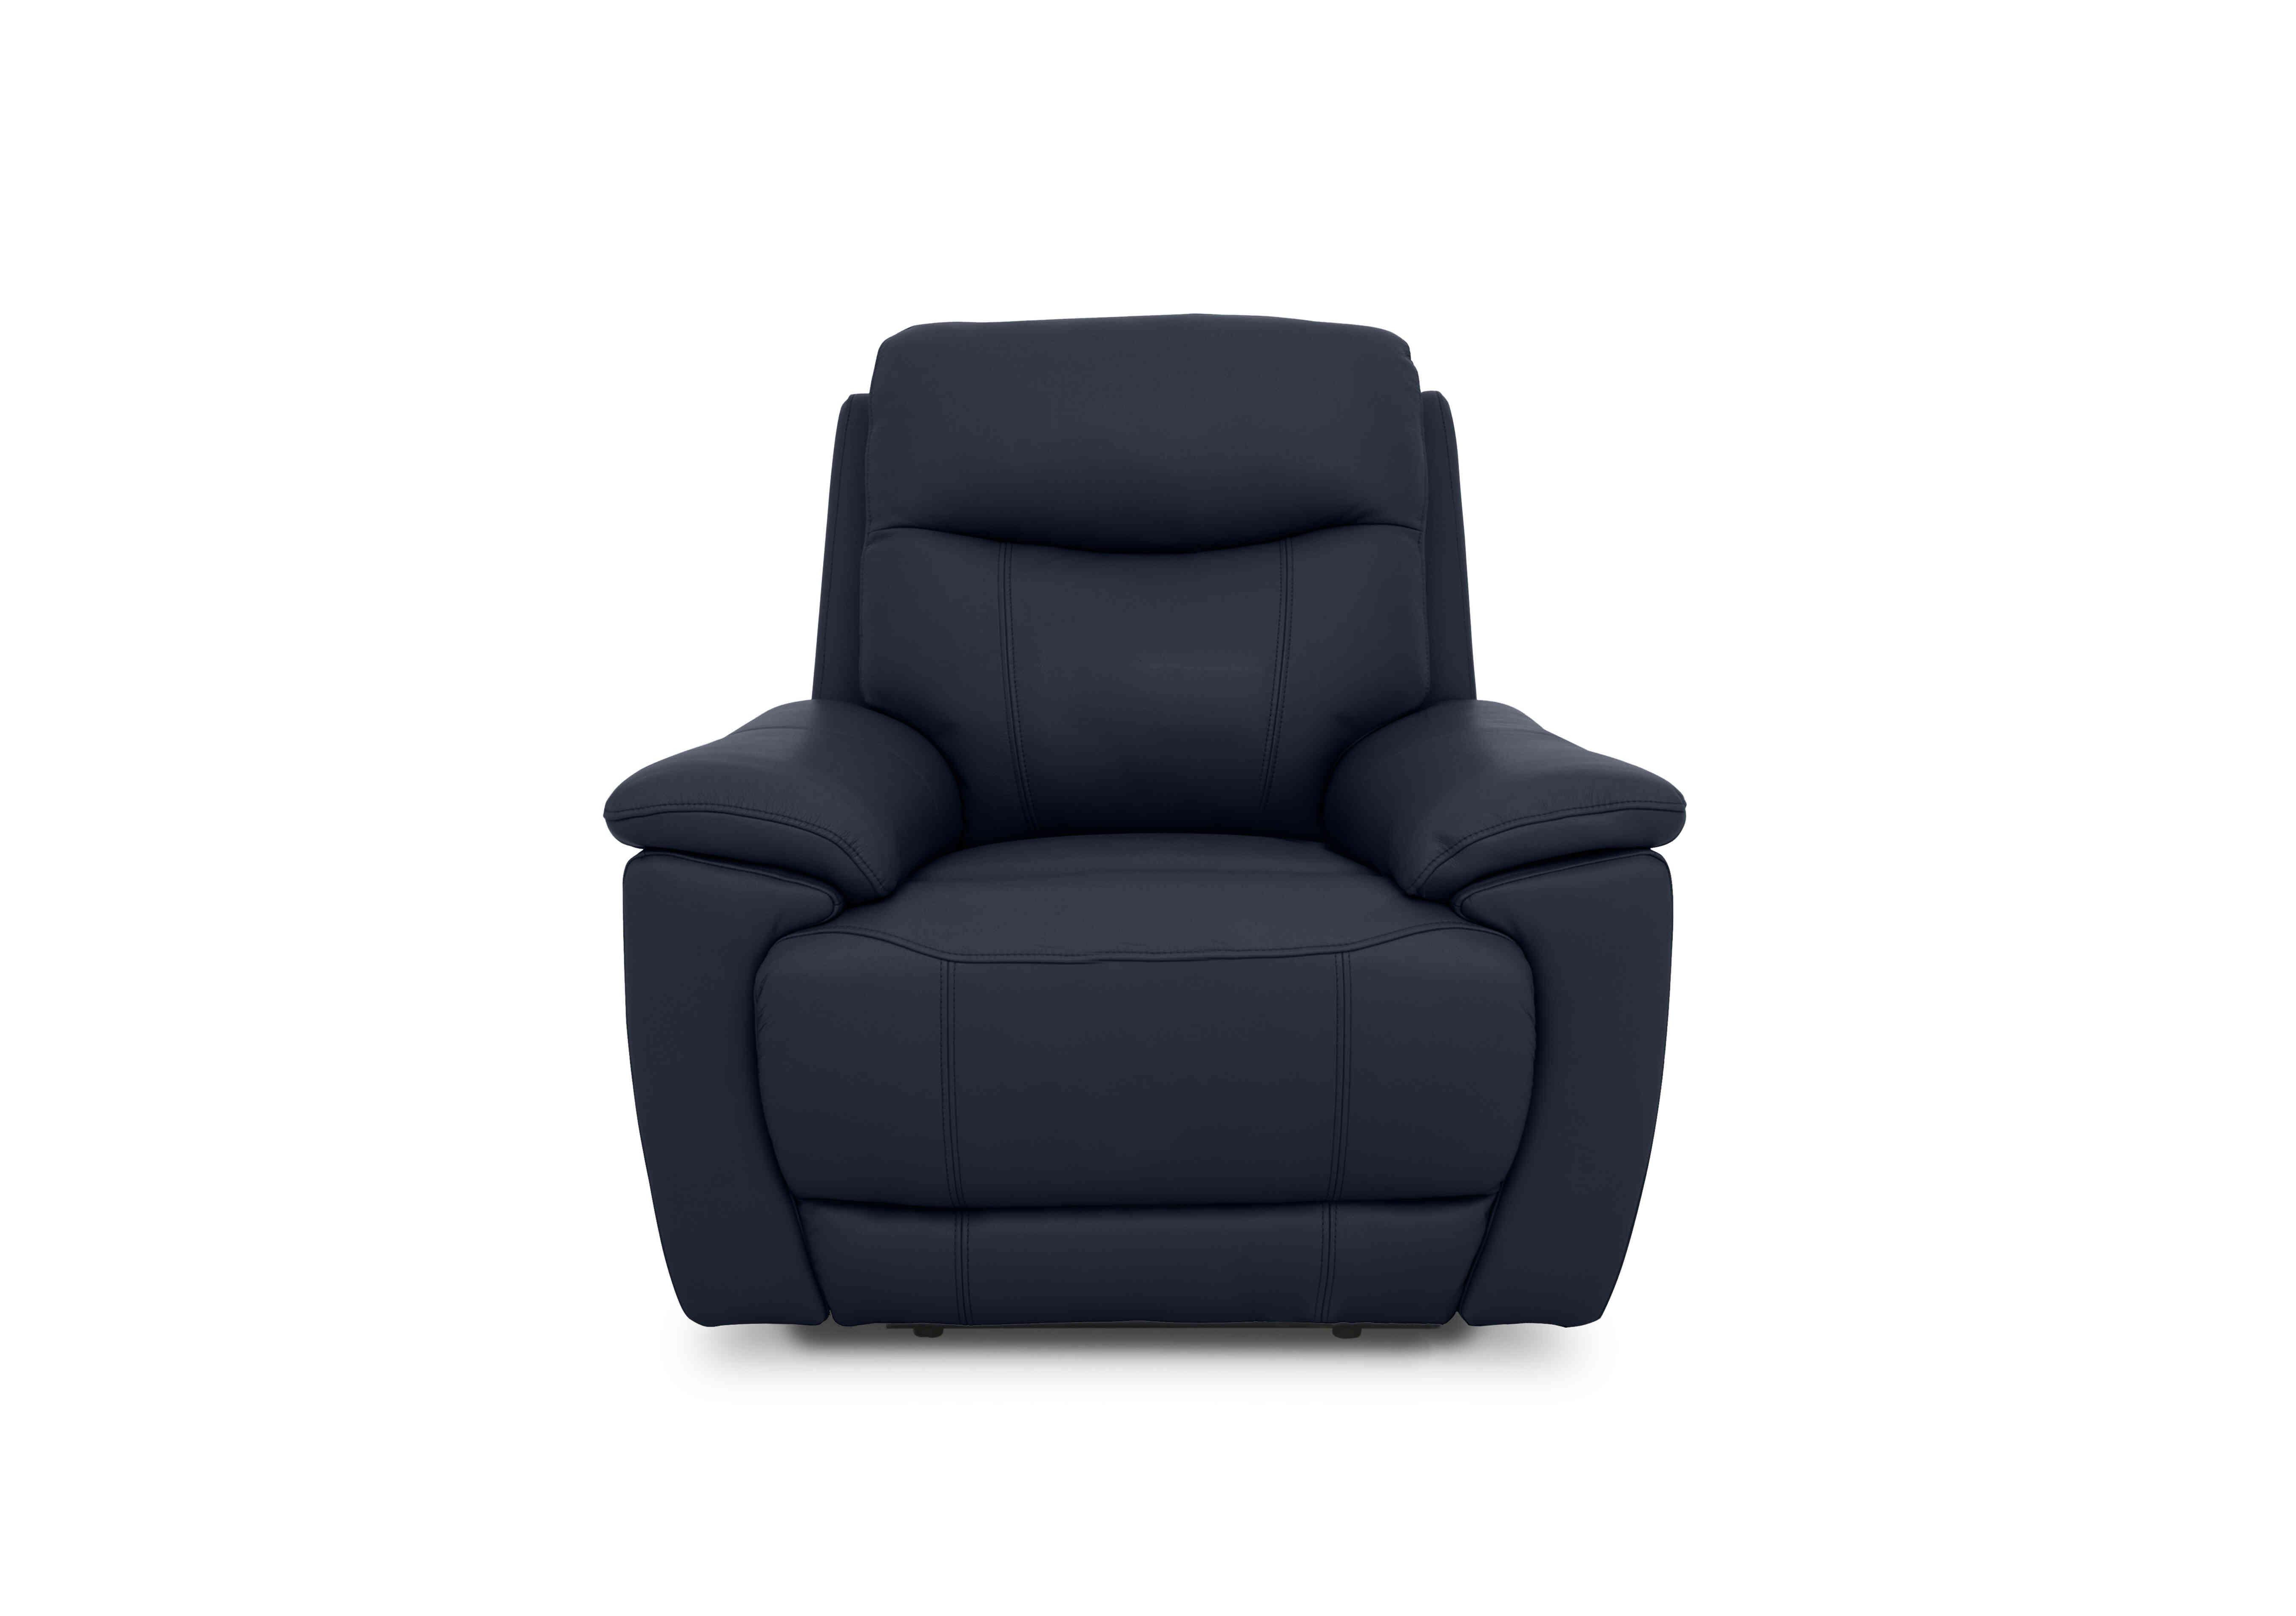 Sloane Leather Chair in Cat-40/09 Peacock on Furniture Village